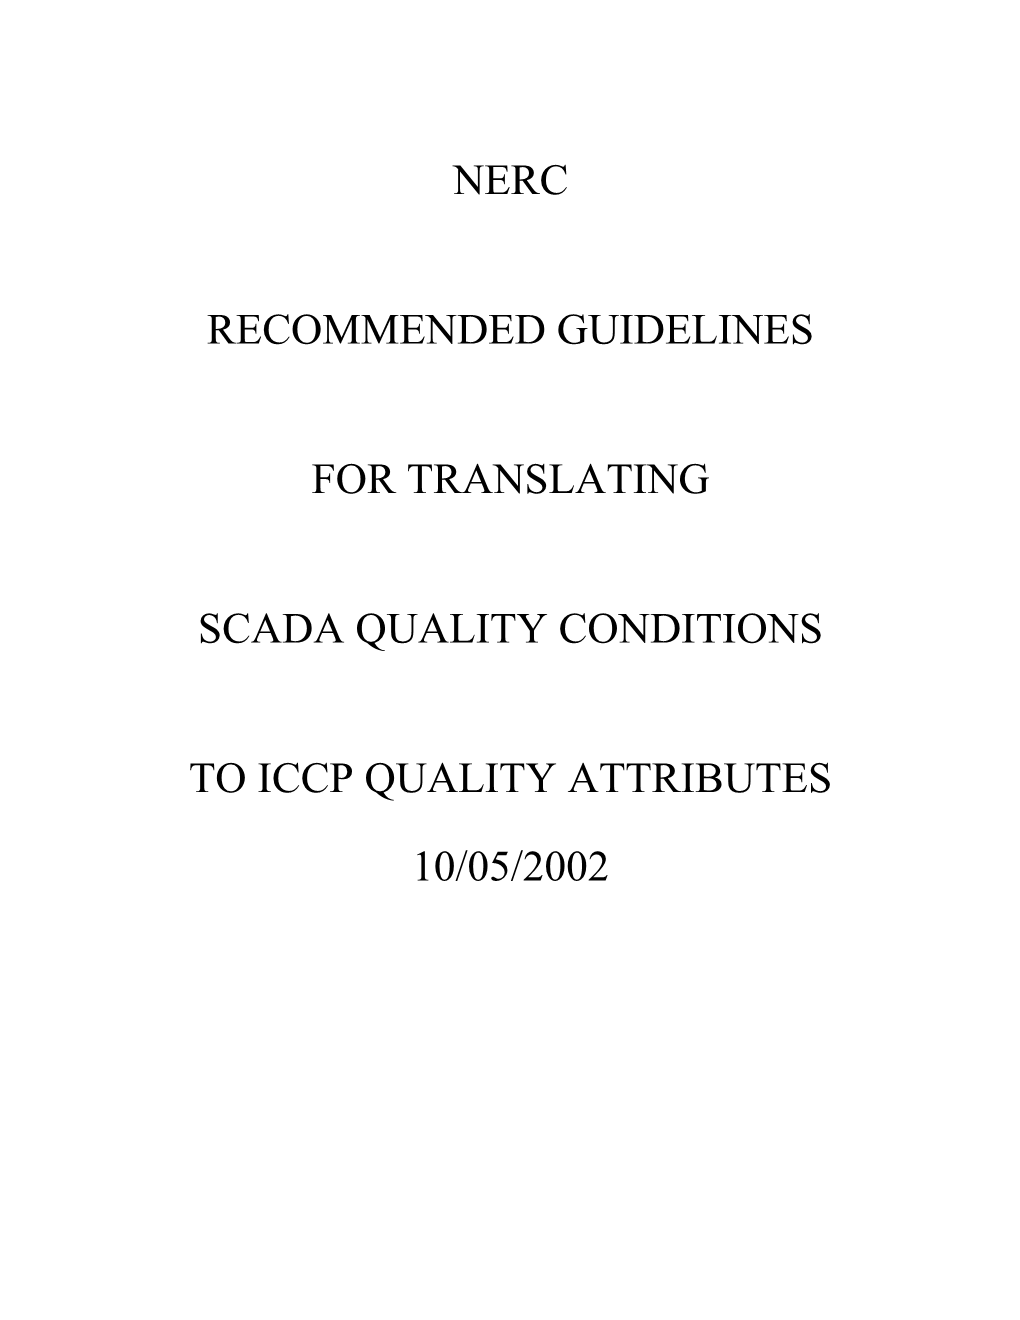 Recommended Guidelines